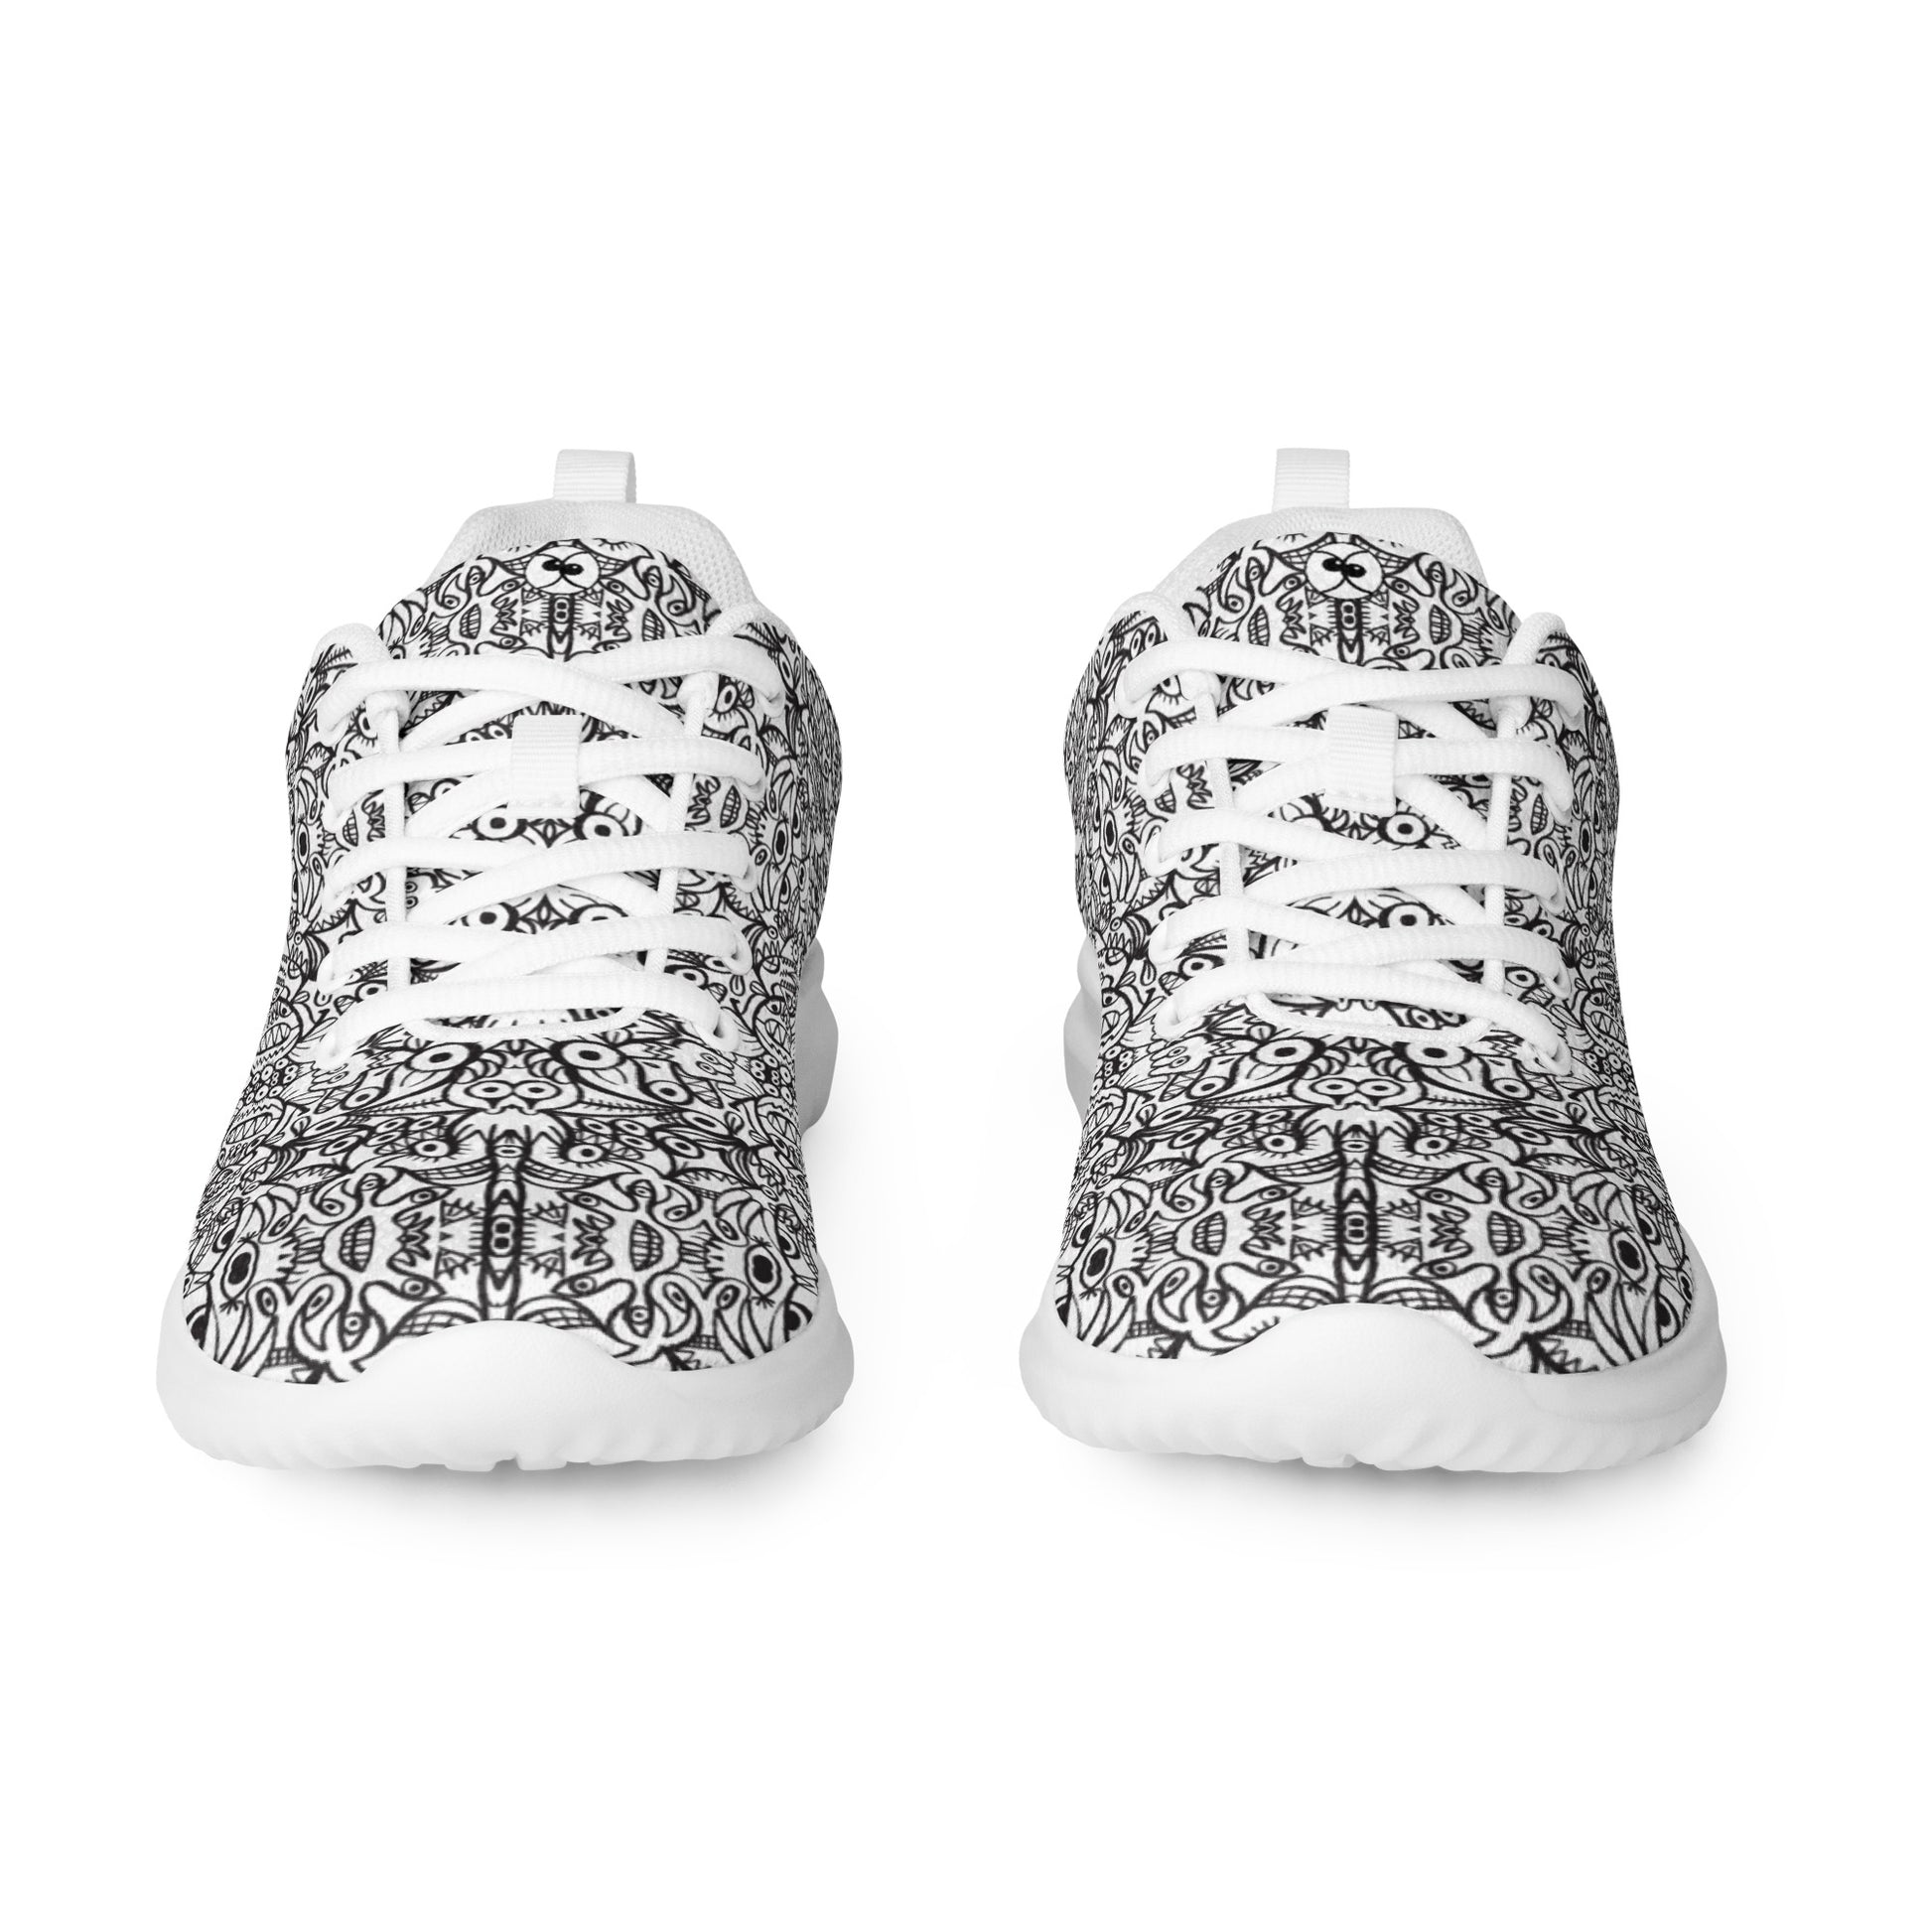 Doodle sneakers. Brush style doodle critters Women’s athletic shoes. Front view